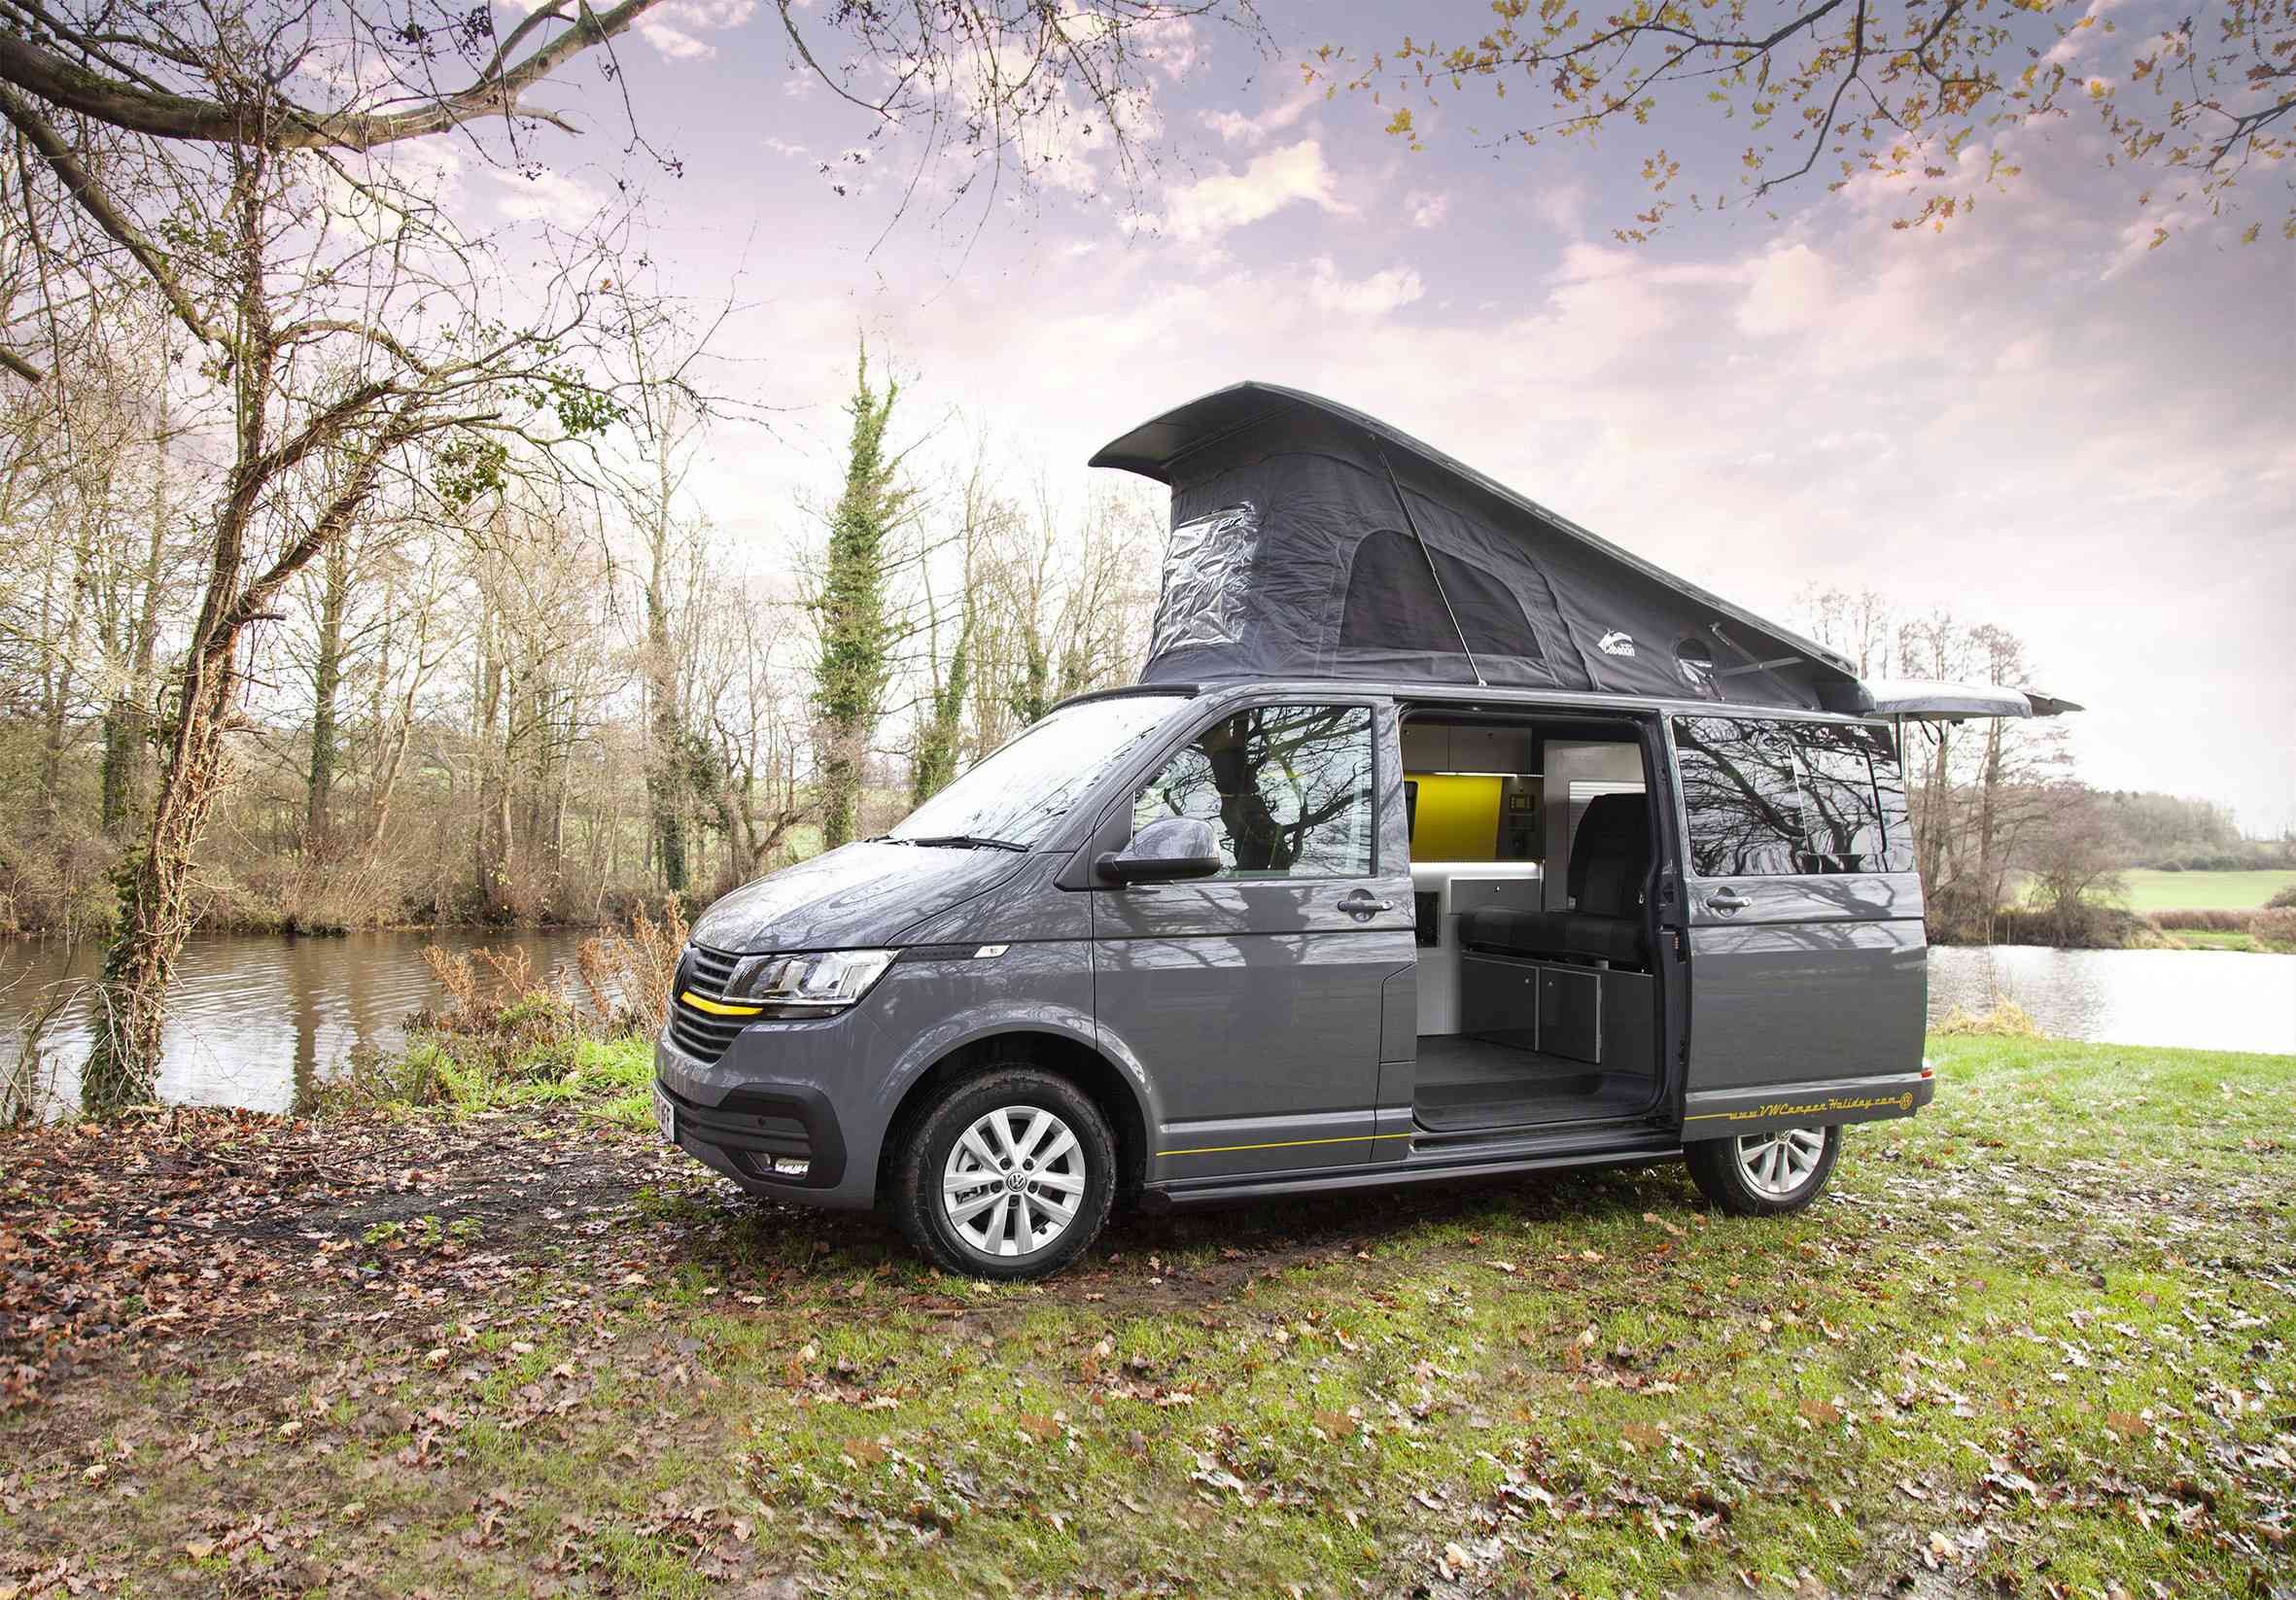 A  Campervan called Holly-T6 and  for hire in Northampton, Northamptonshire